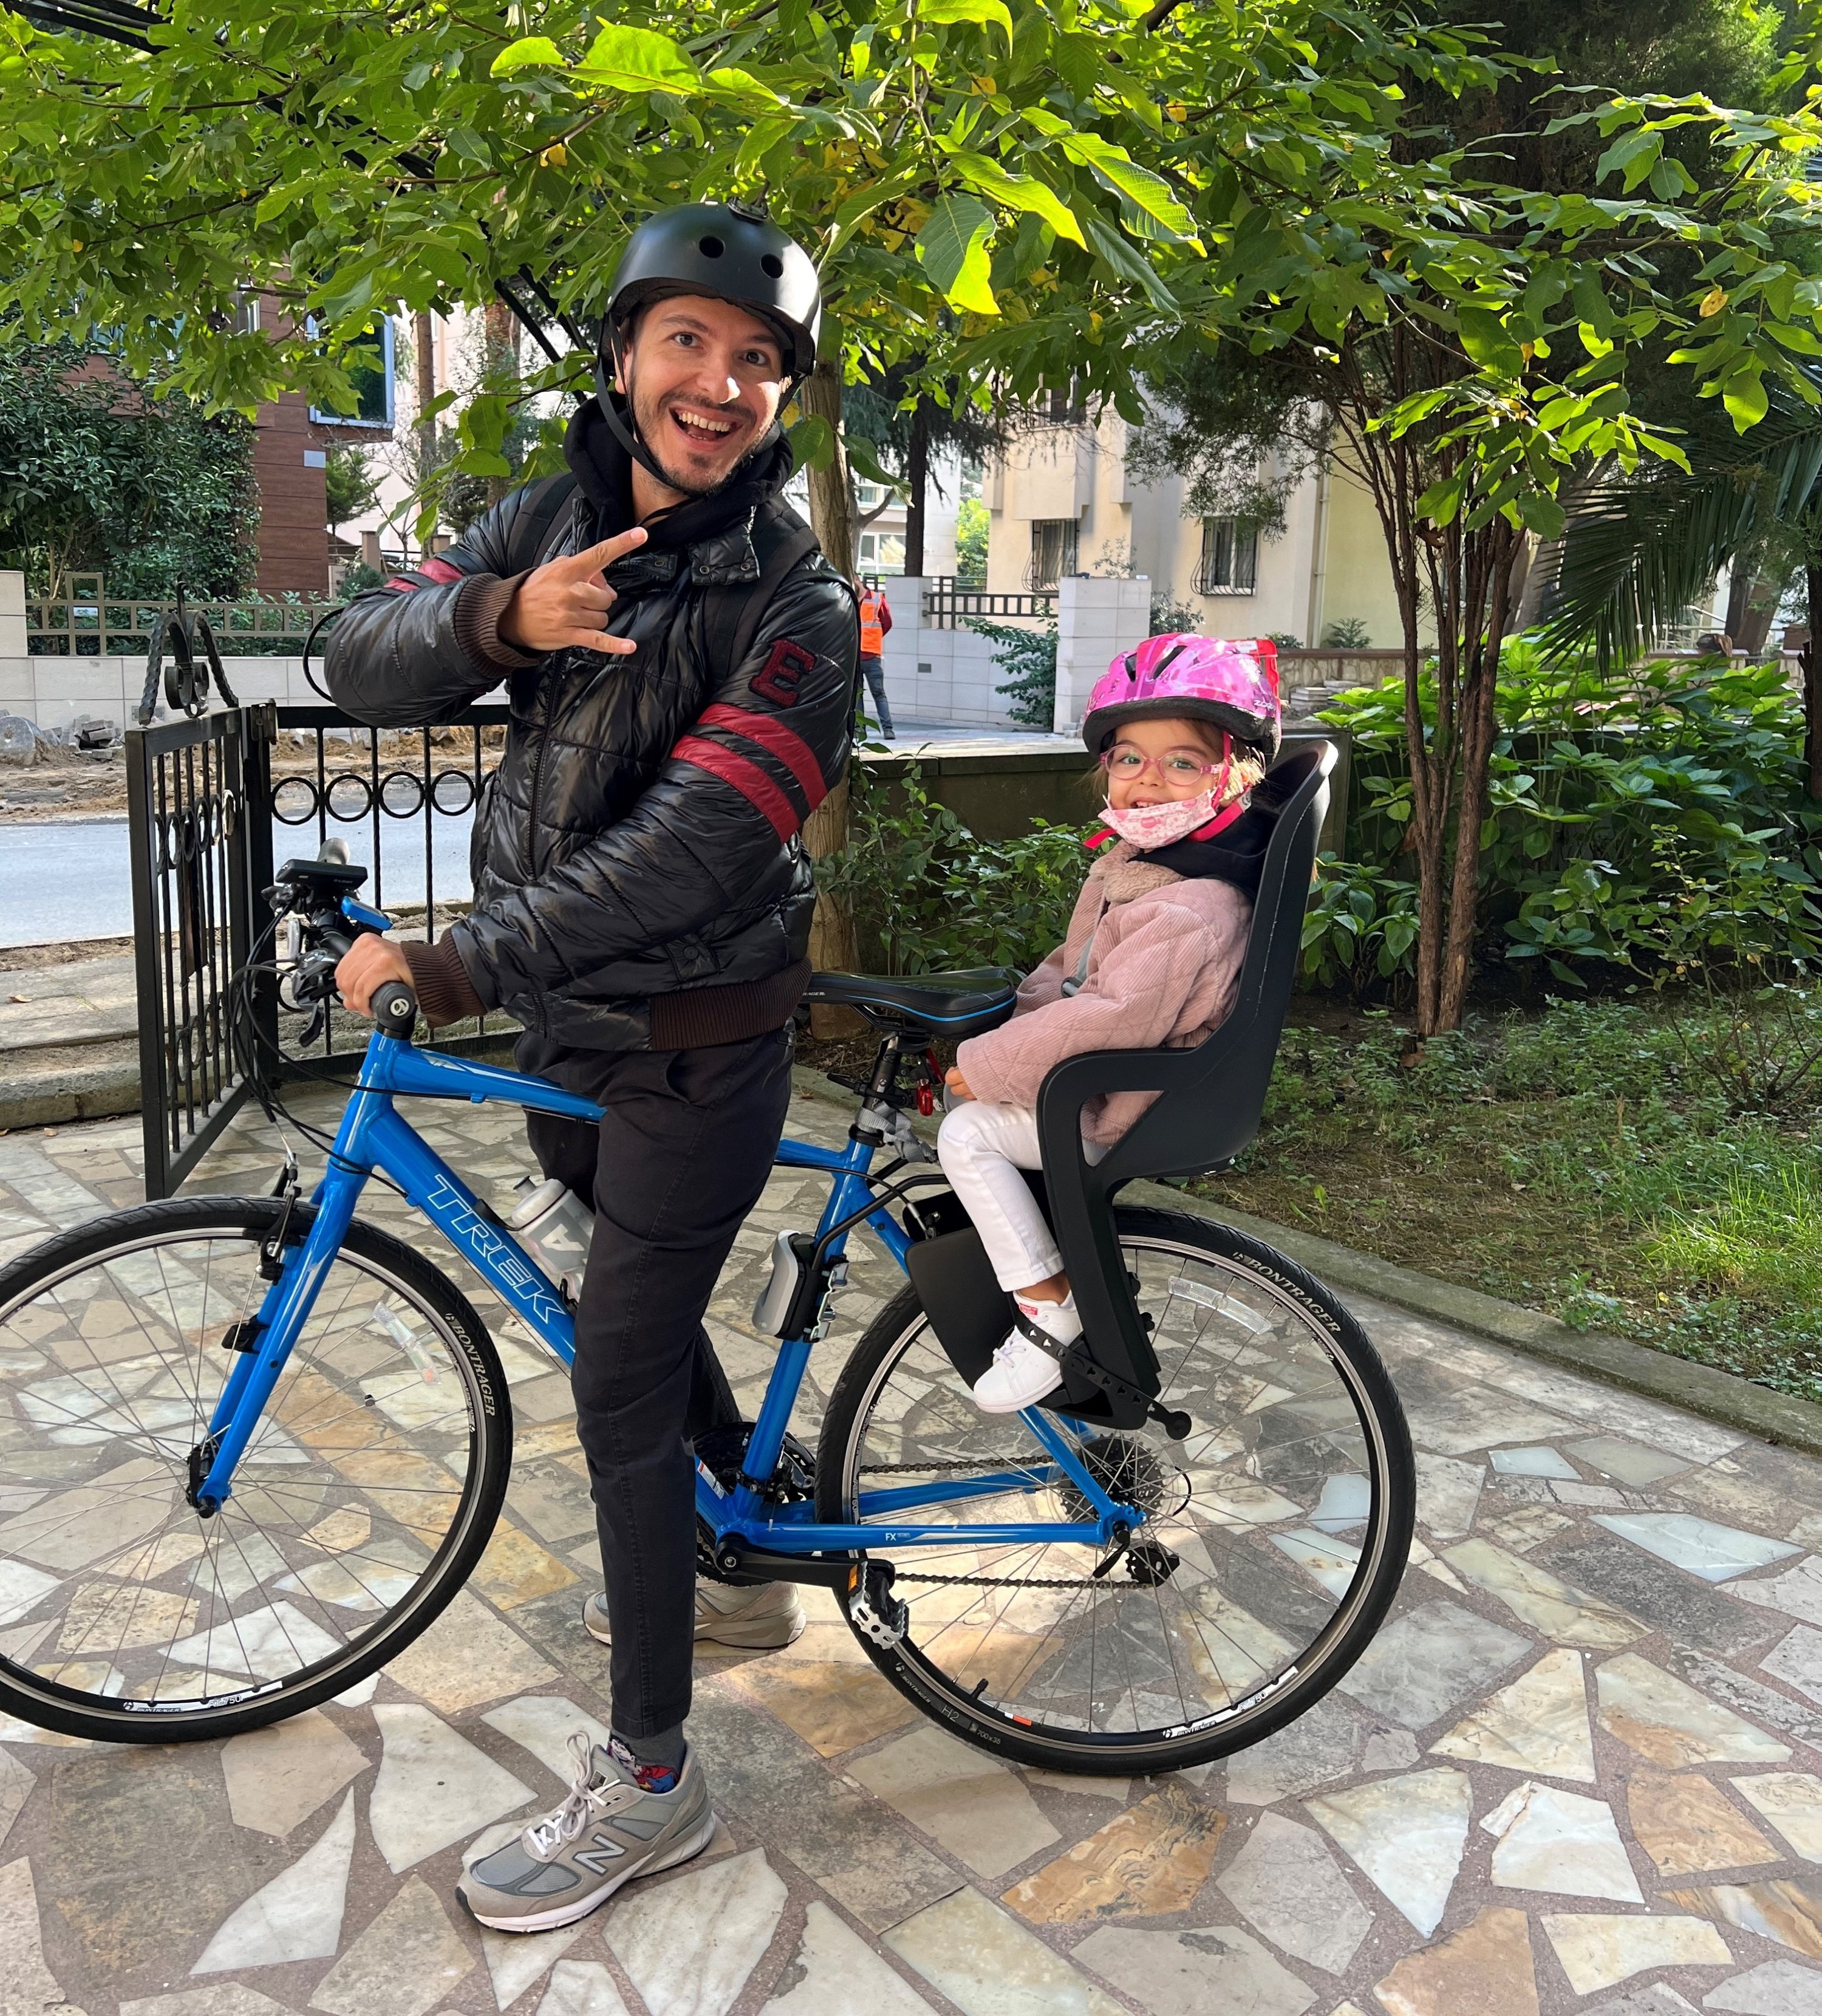 Celal Tolga Imamoğlu and his 3-year-old daughter pose on their bicycle in front of their house. (Courtesy of Celal Tolga İmamoğlu)